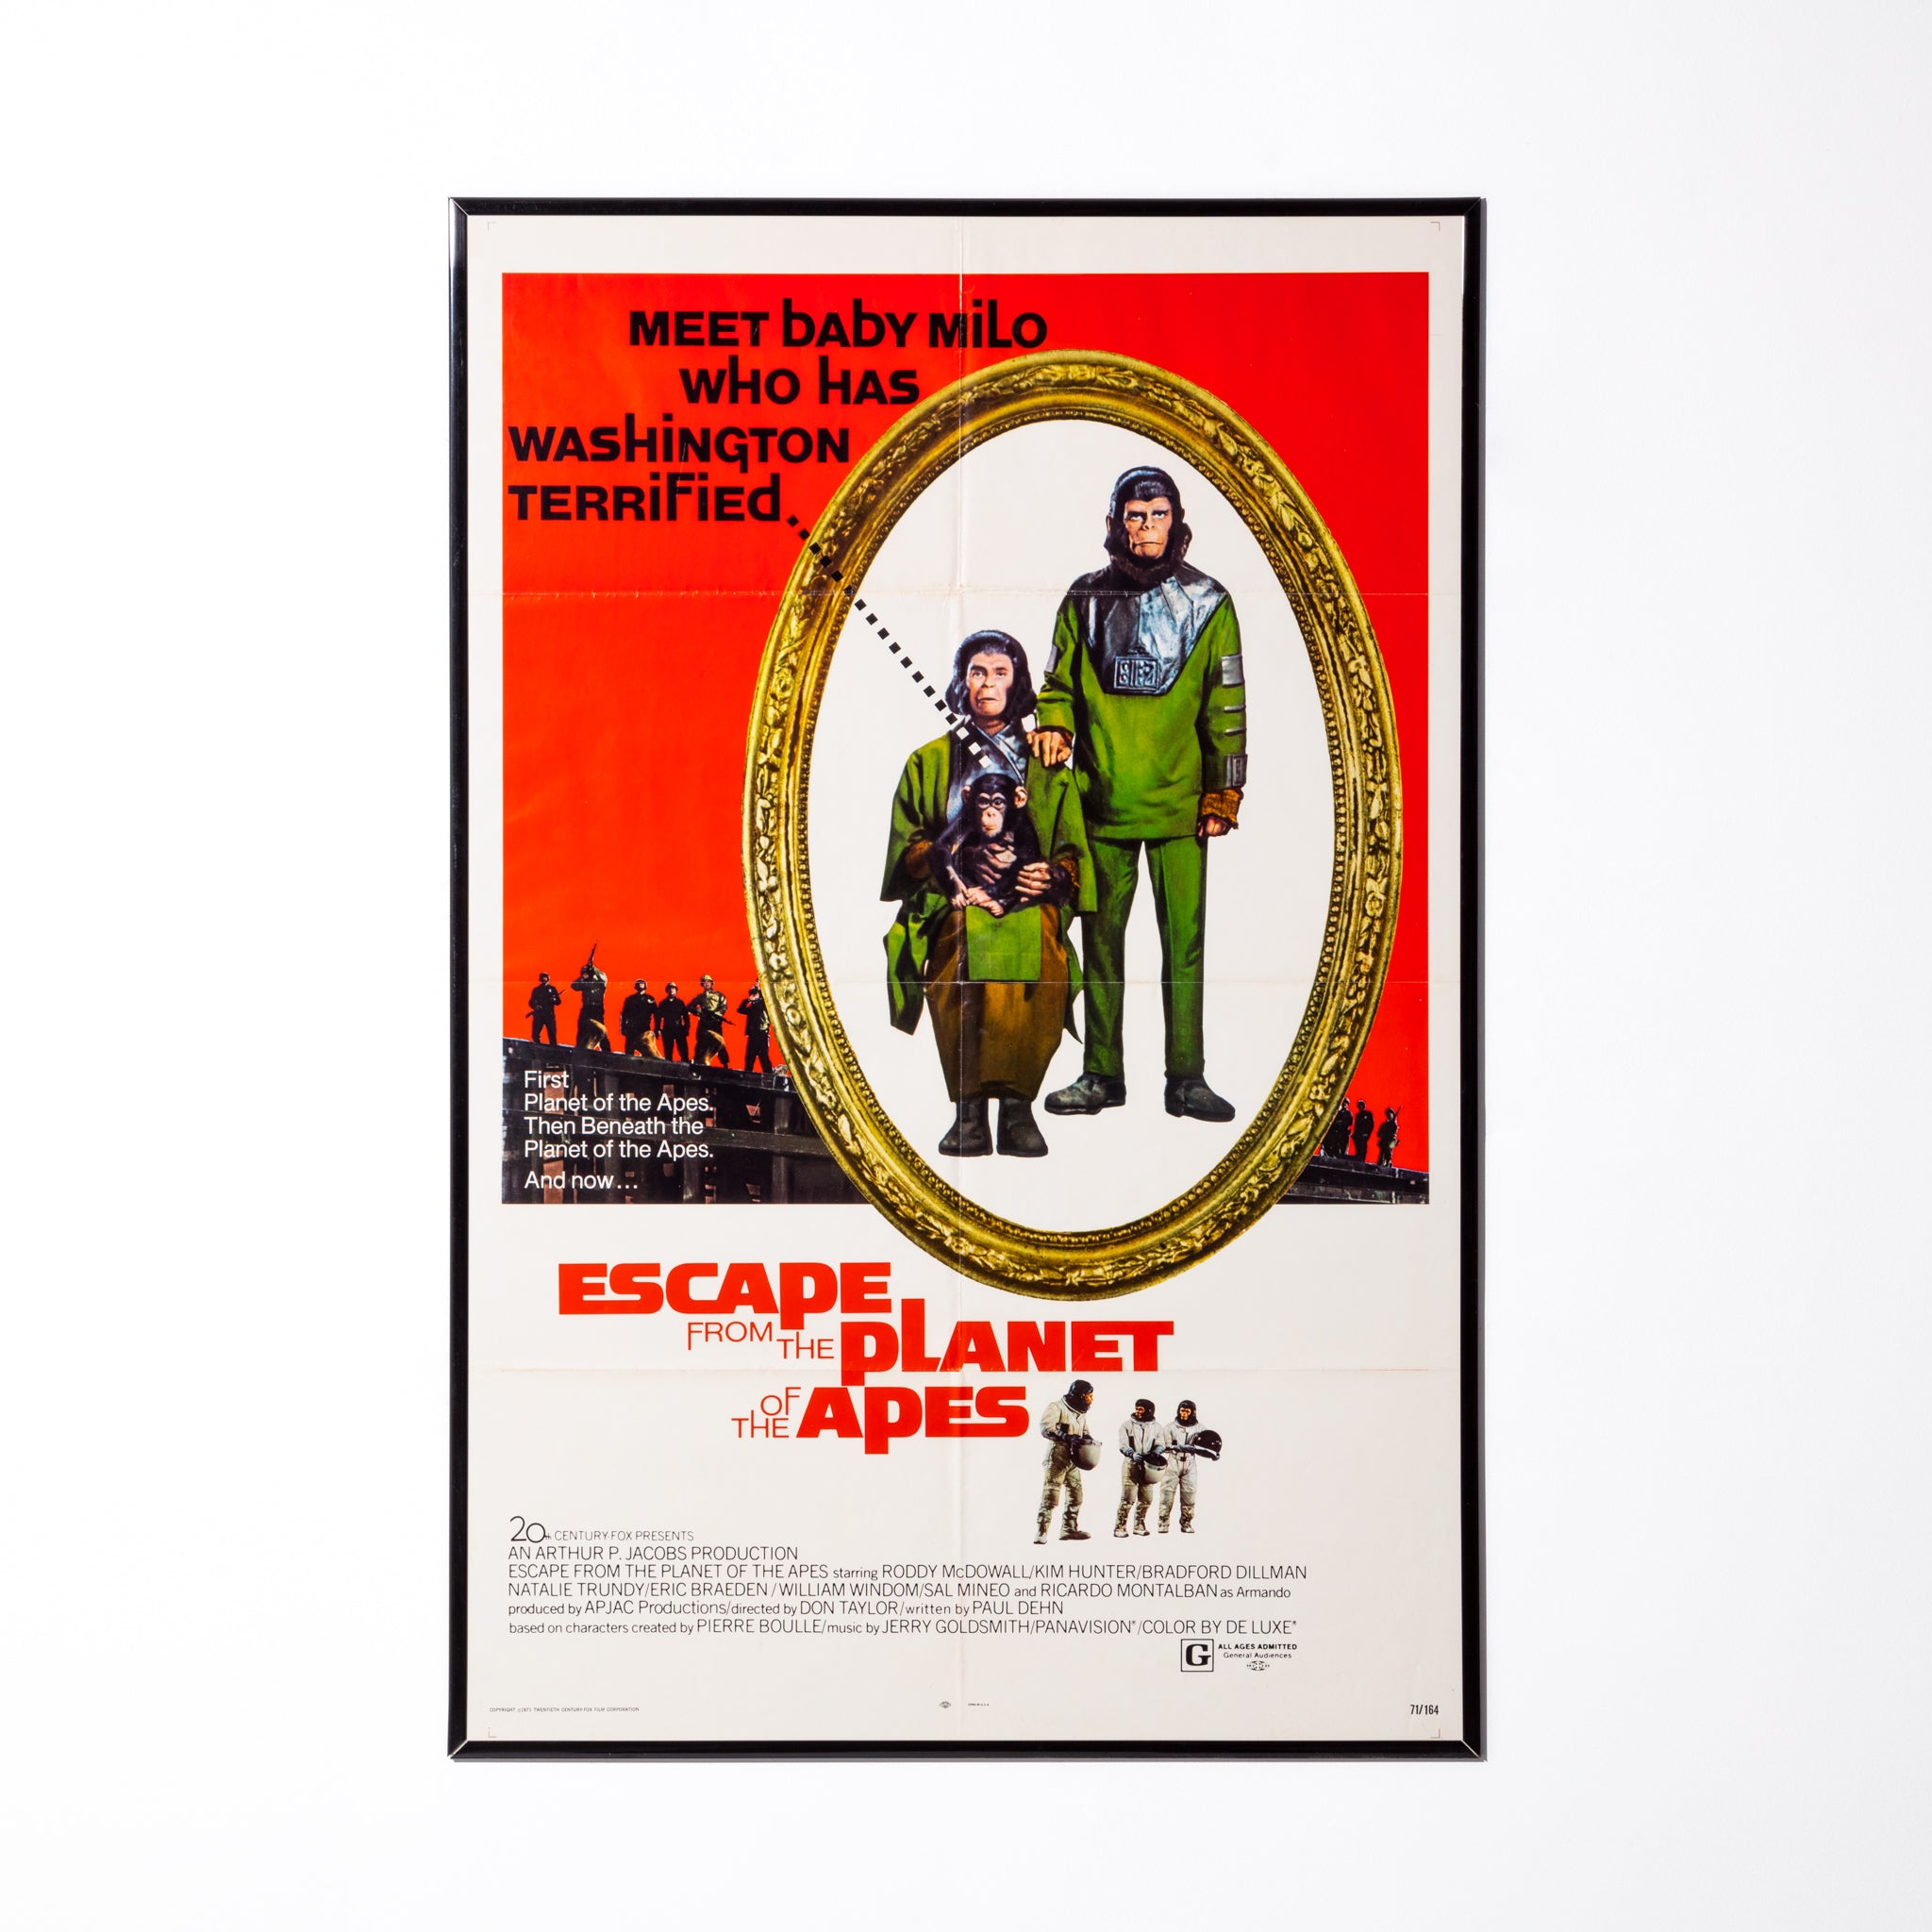 1971 Escape from the Planet of the Apes movie poster